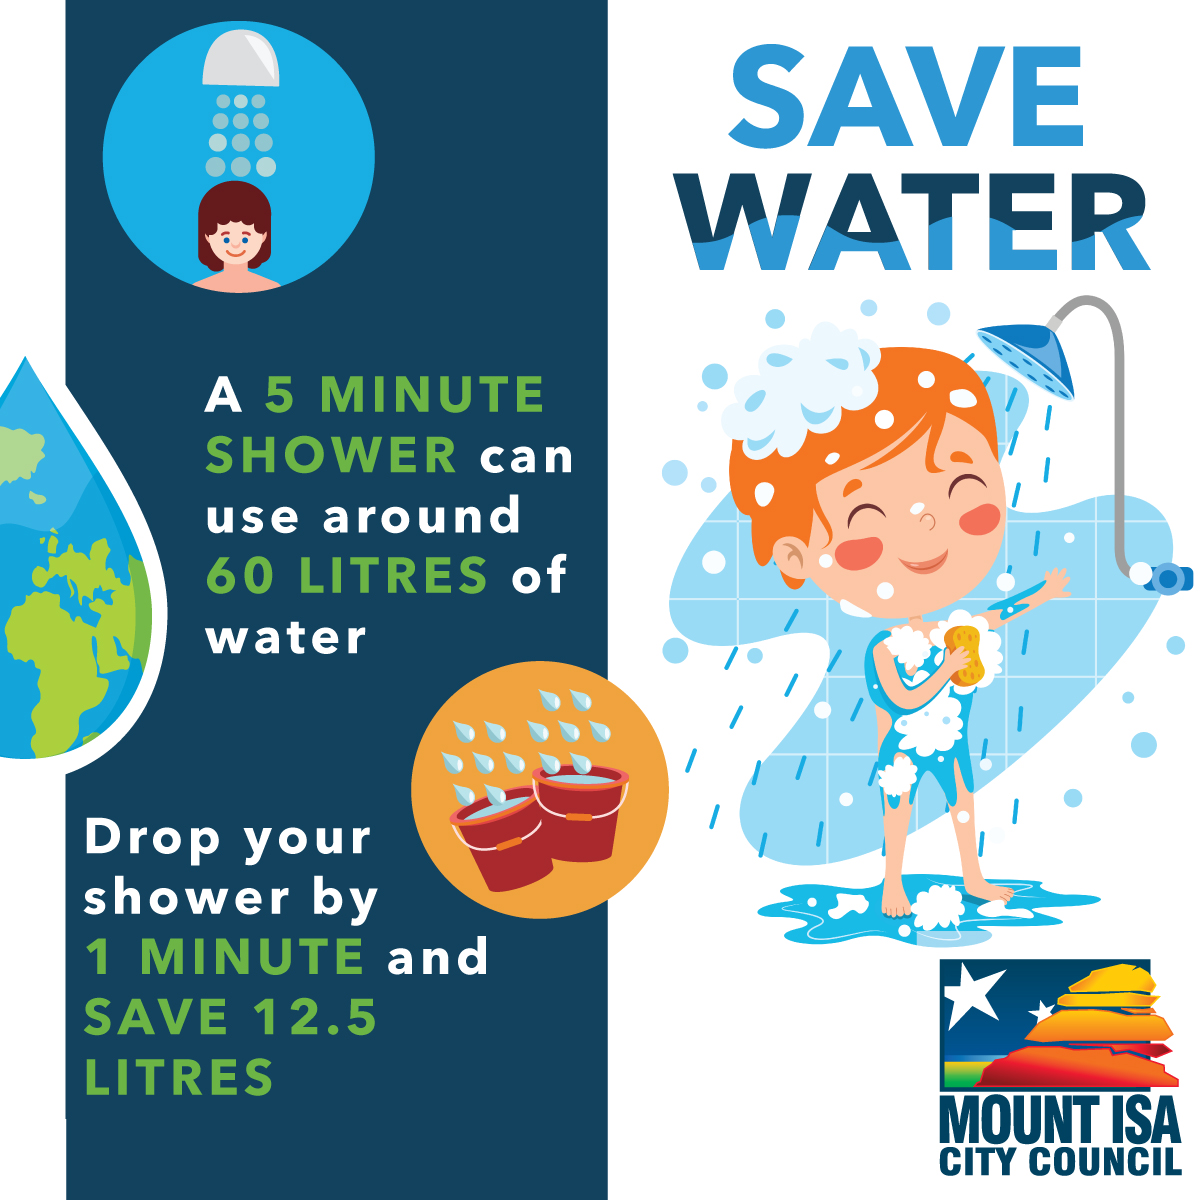 Save Water - Shorter Showers